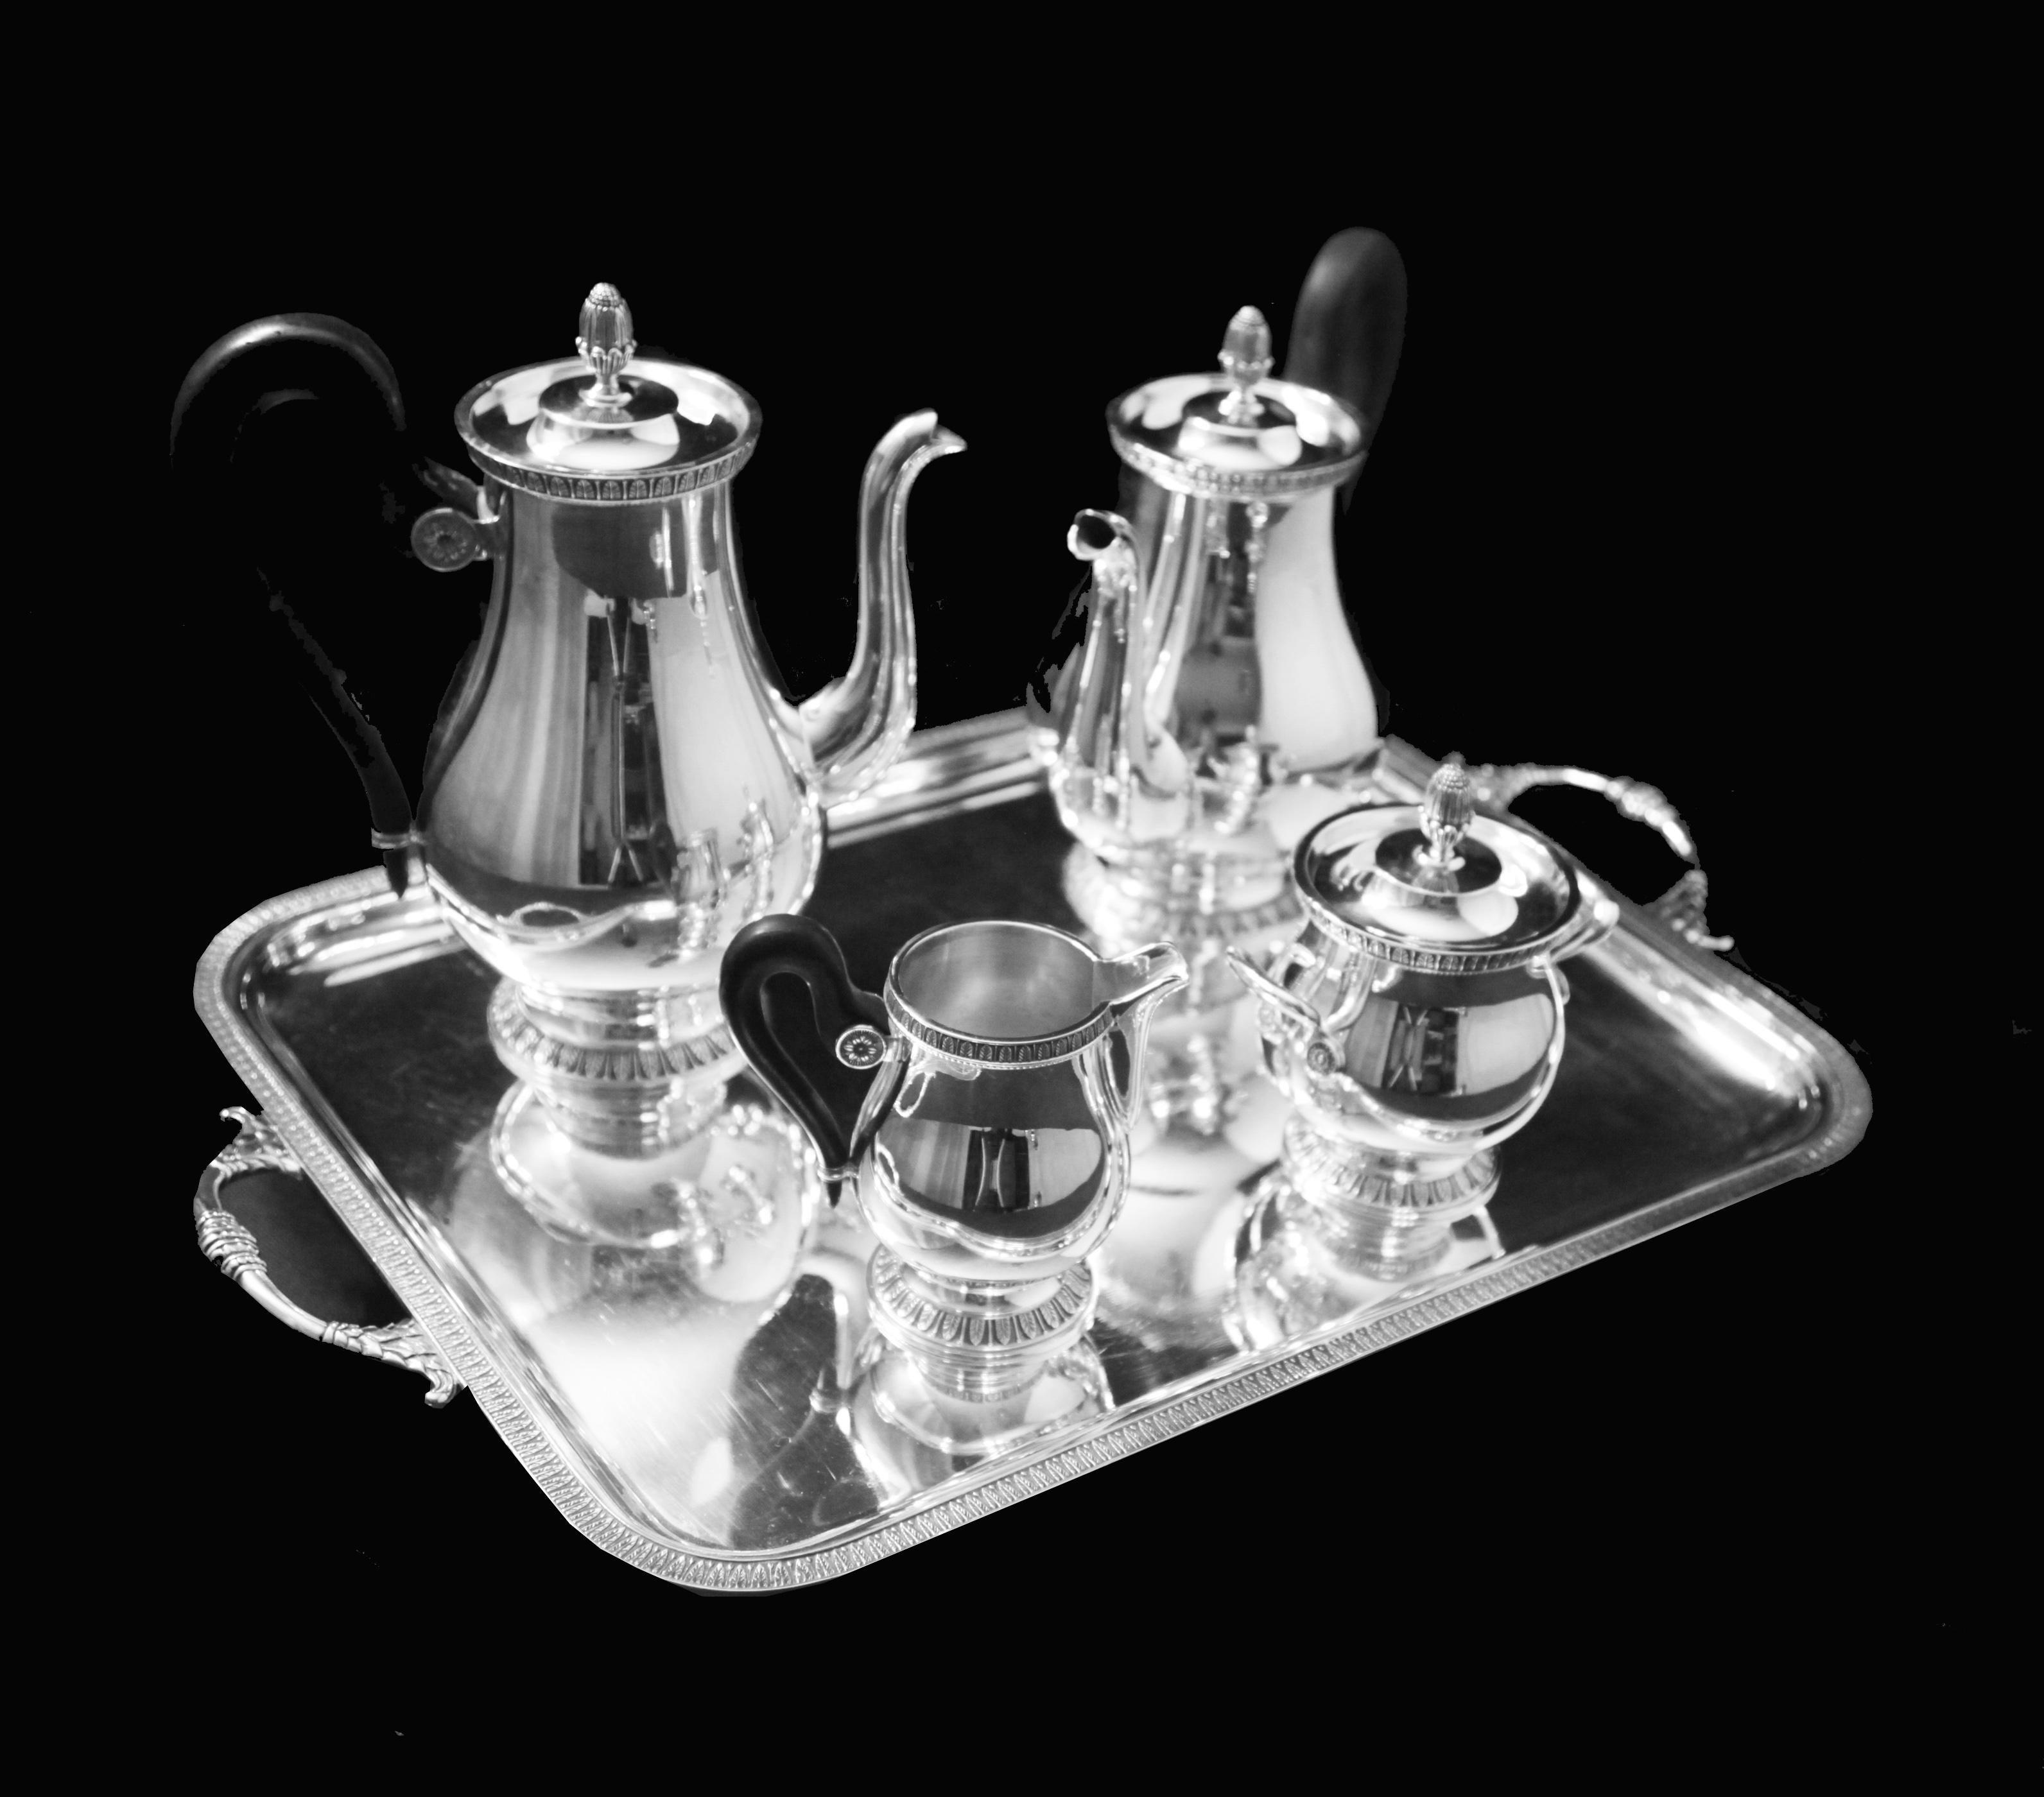 Direct from Paris, a magnificent 5-piece French antique Louis XVI style silver-plate tea set by France’s premier silversmith “Christofle” – Silversmith to the King.  Each piece in this stunning set has been professionally refinished to like new